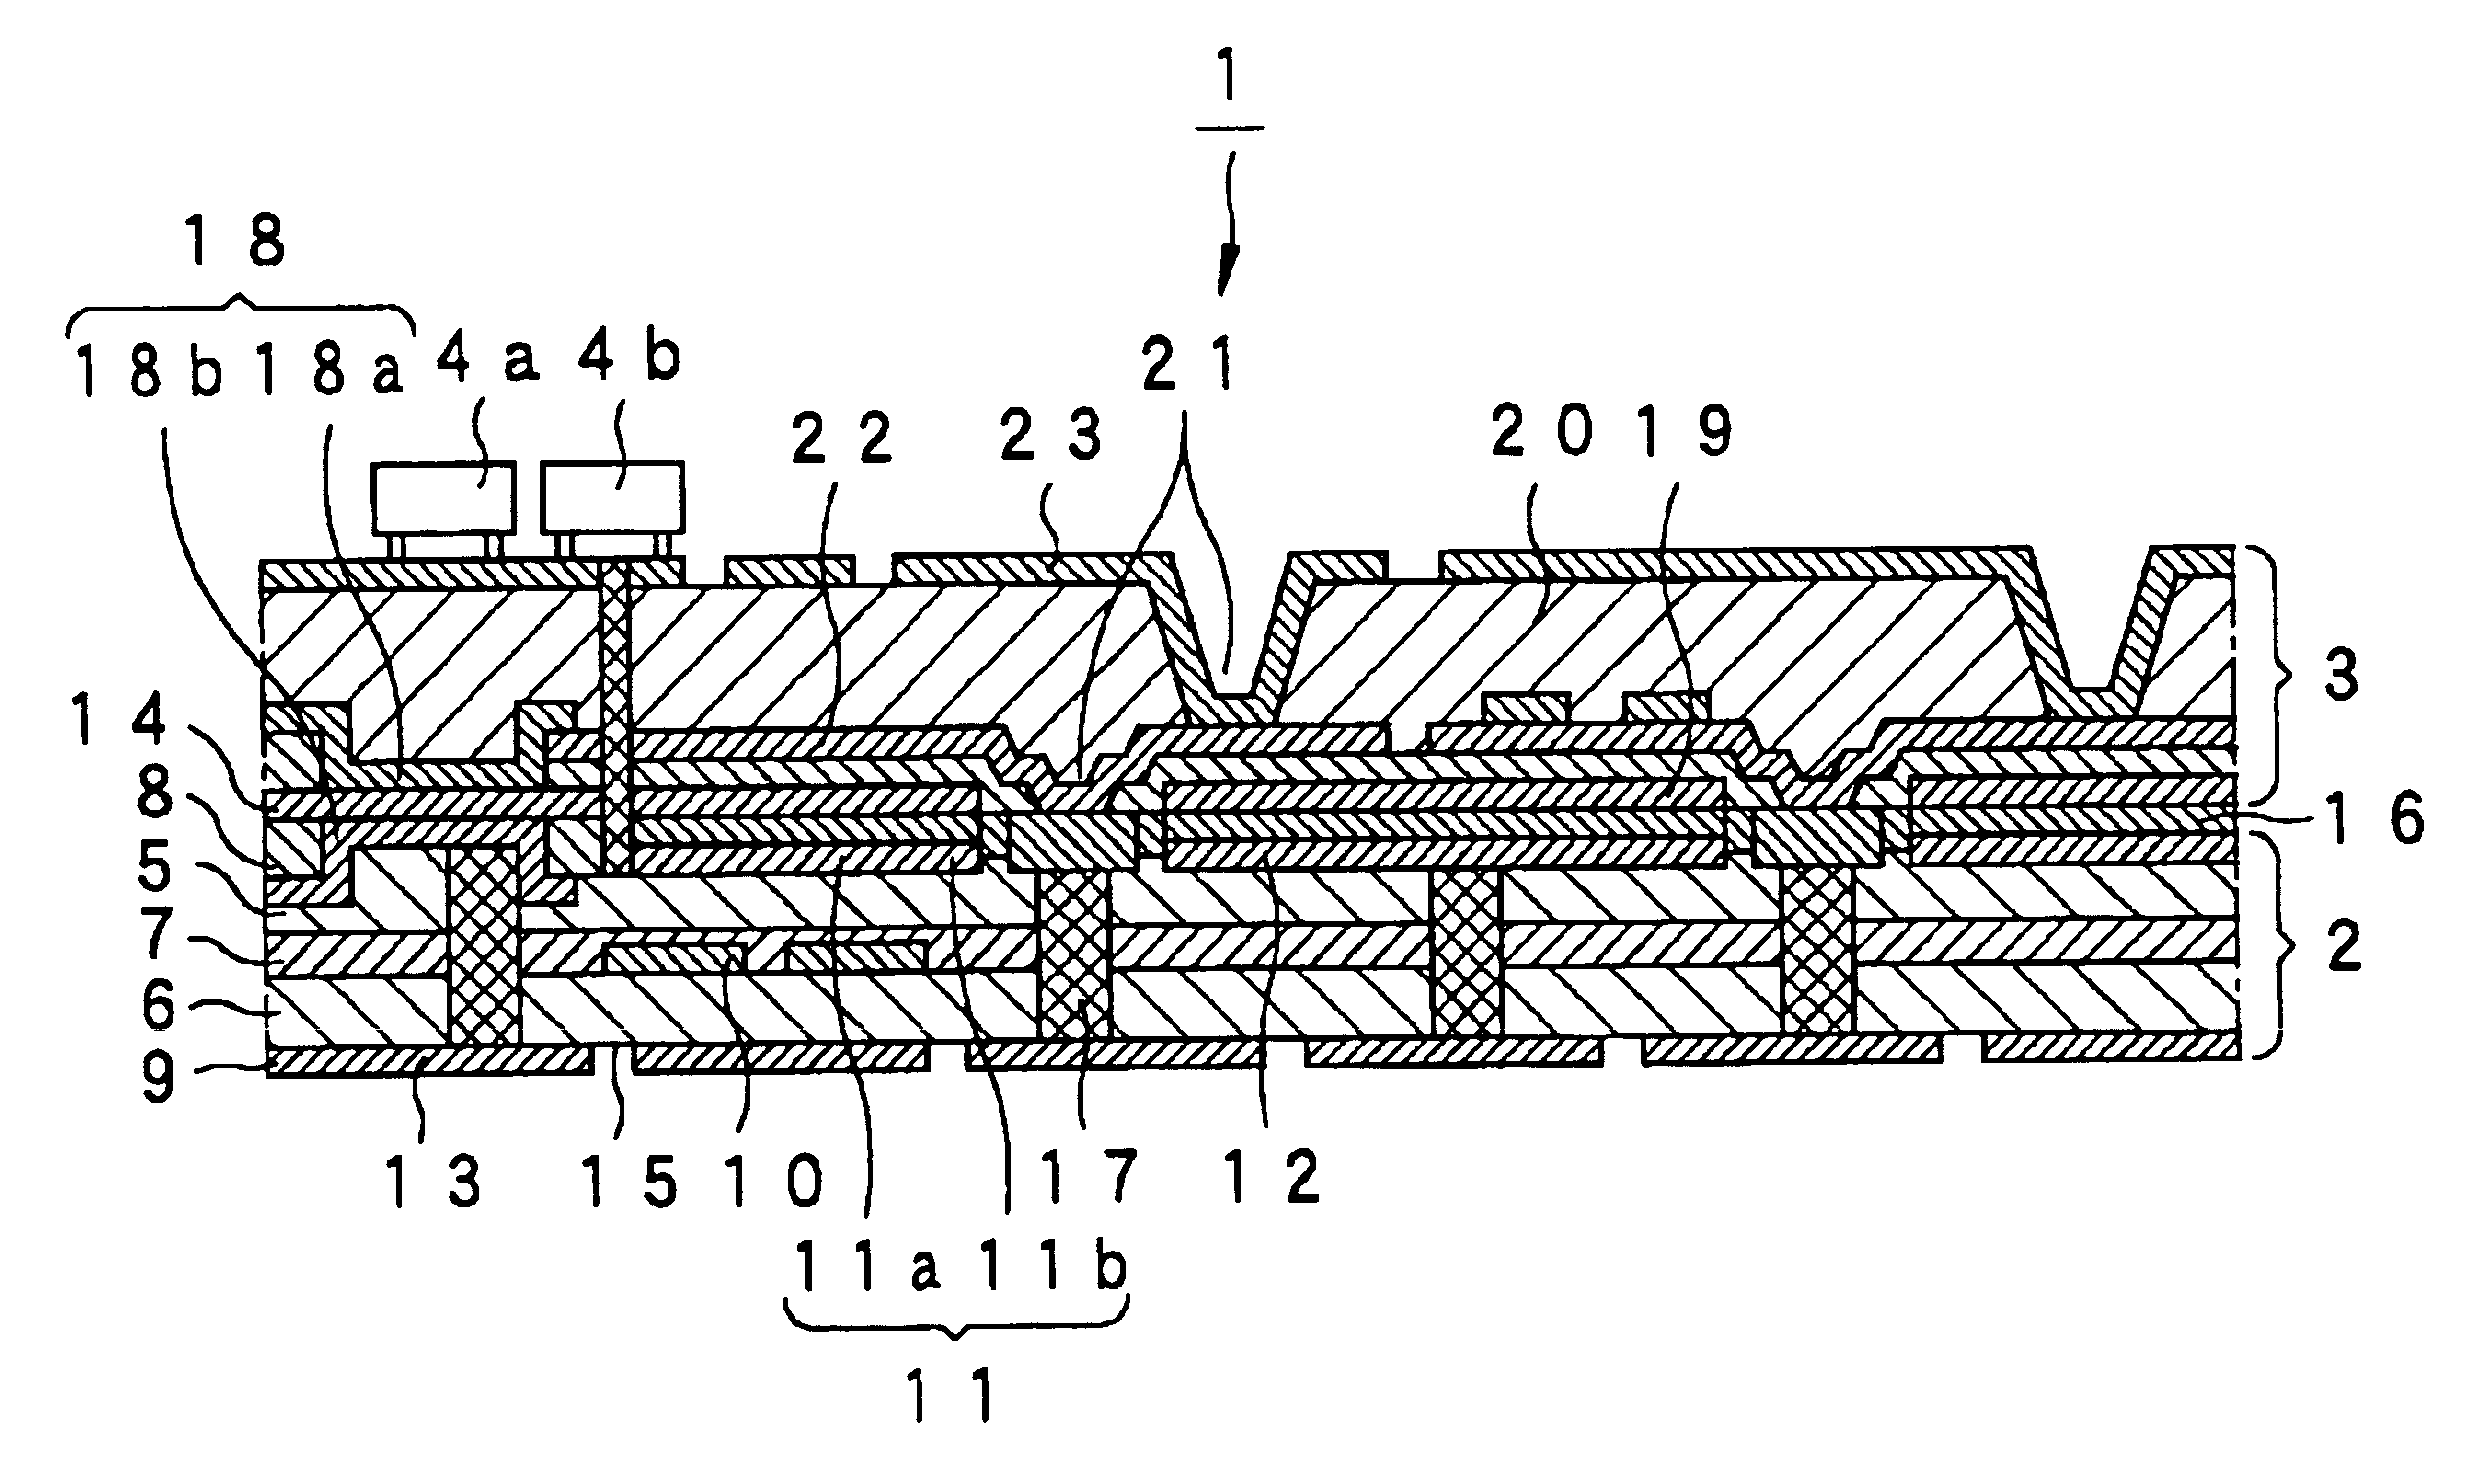 High-frequency module substrate device